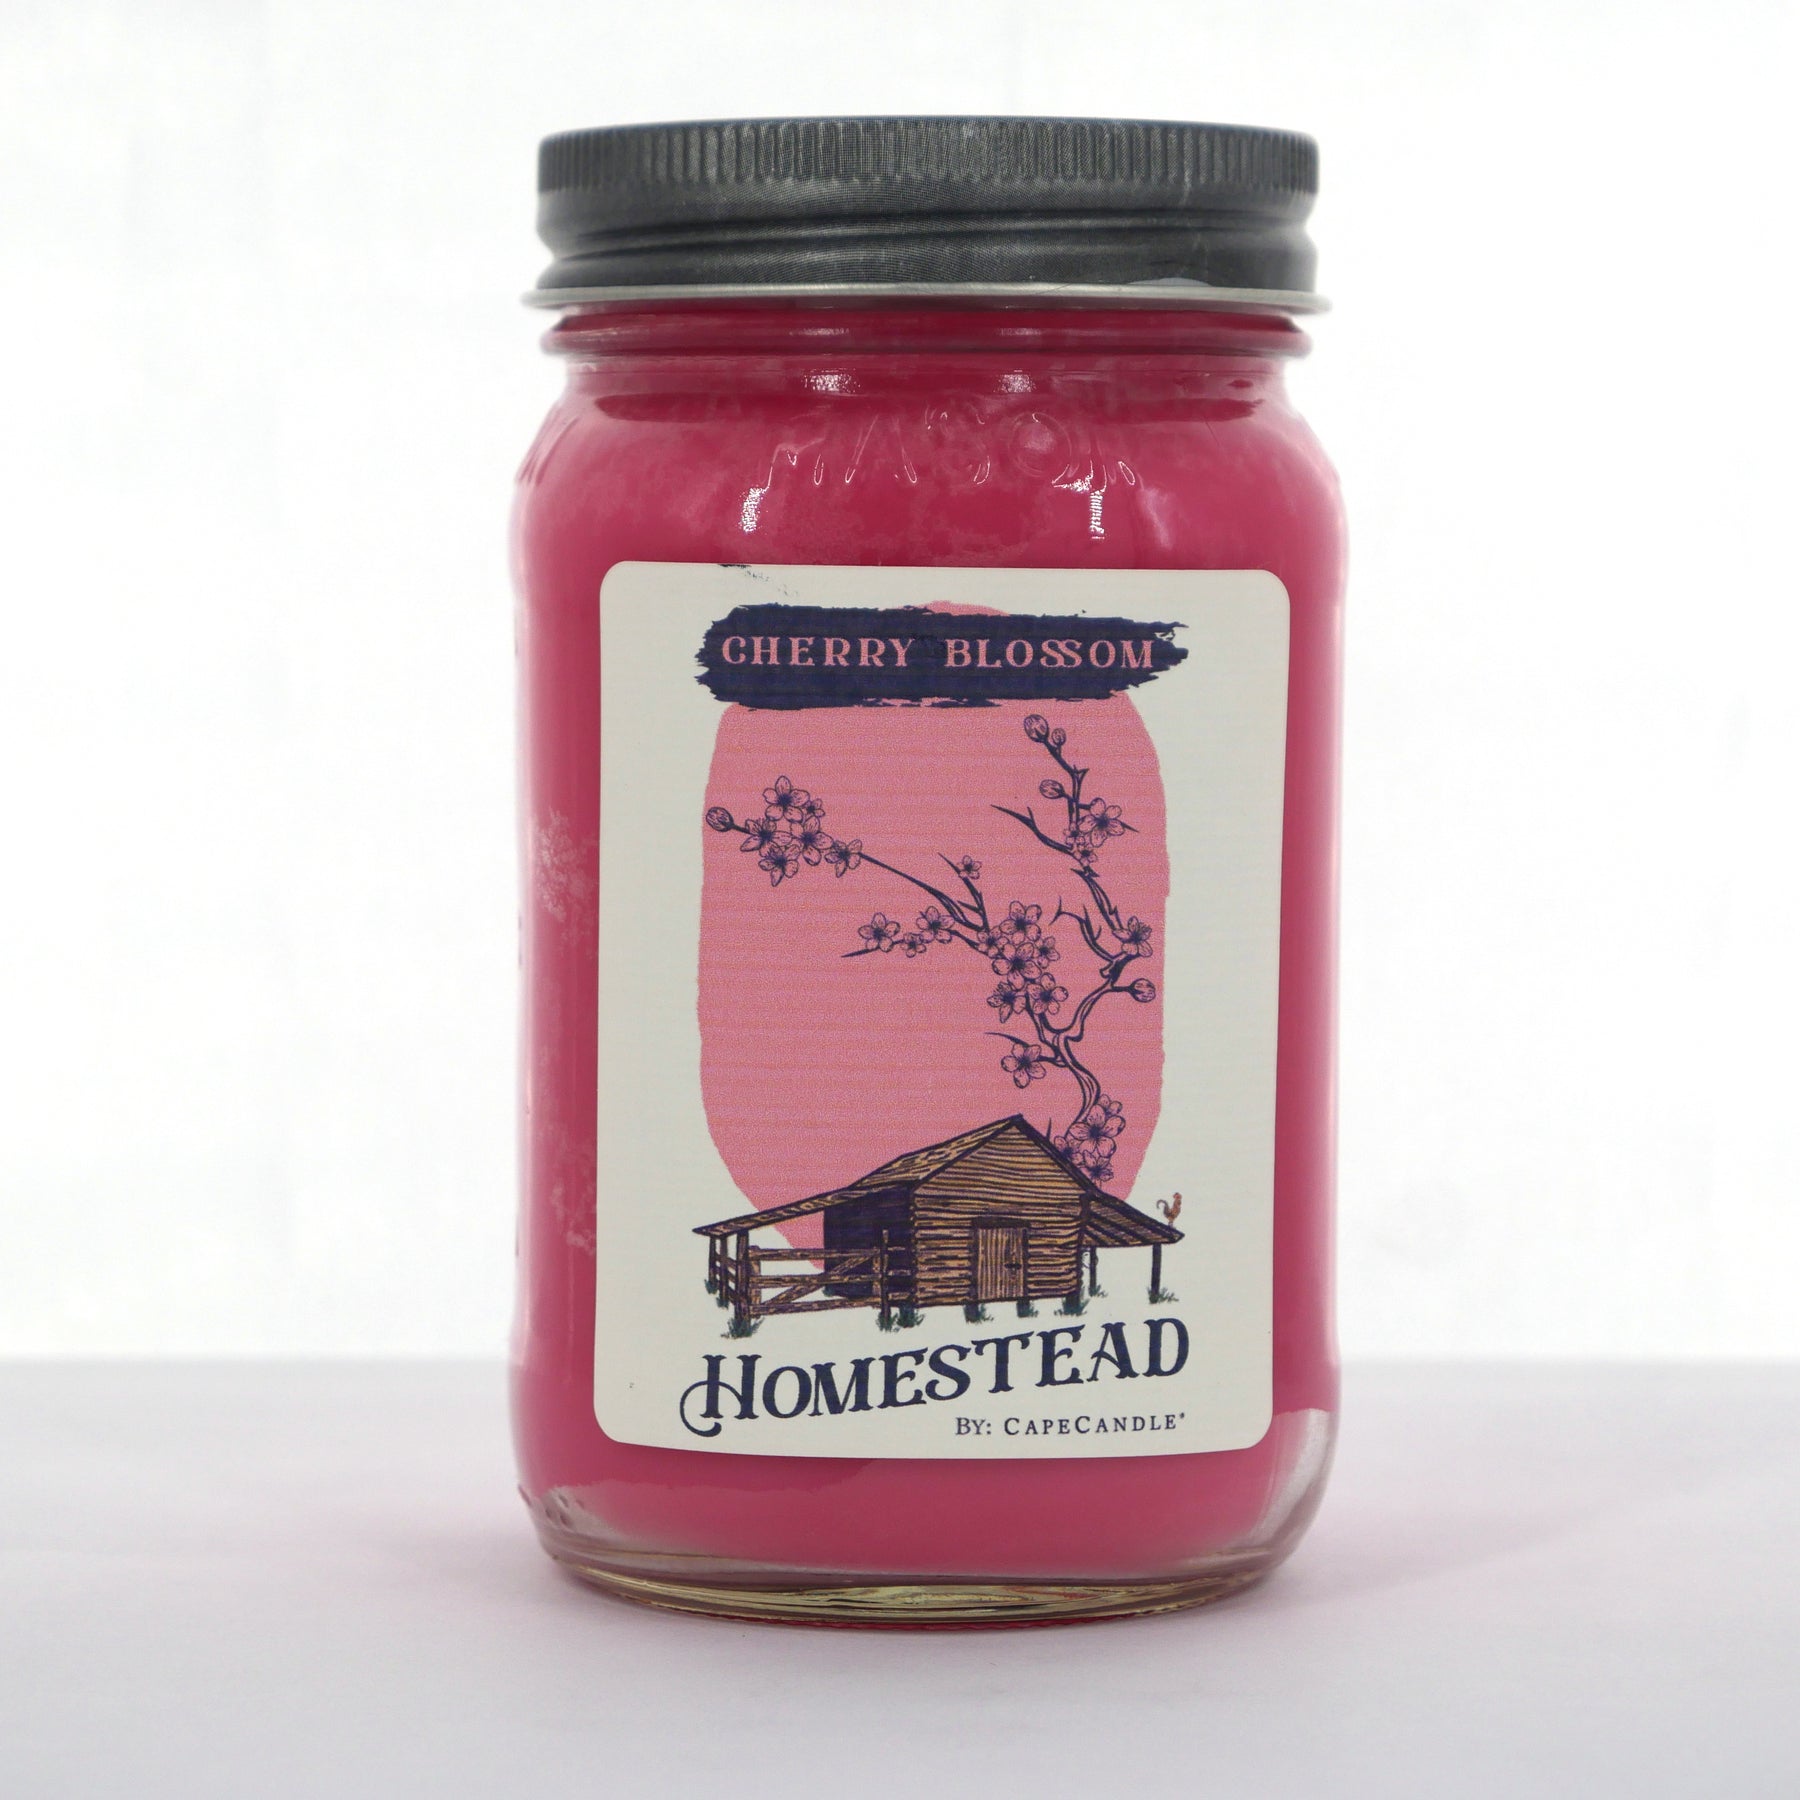 Cherry Blossom Soy Candle 16oz Homestead Mason Jar by Cape Candle